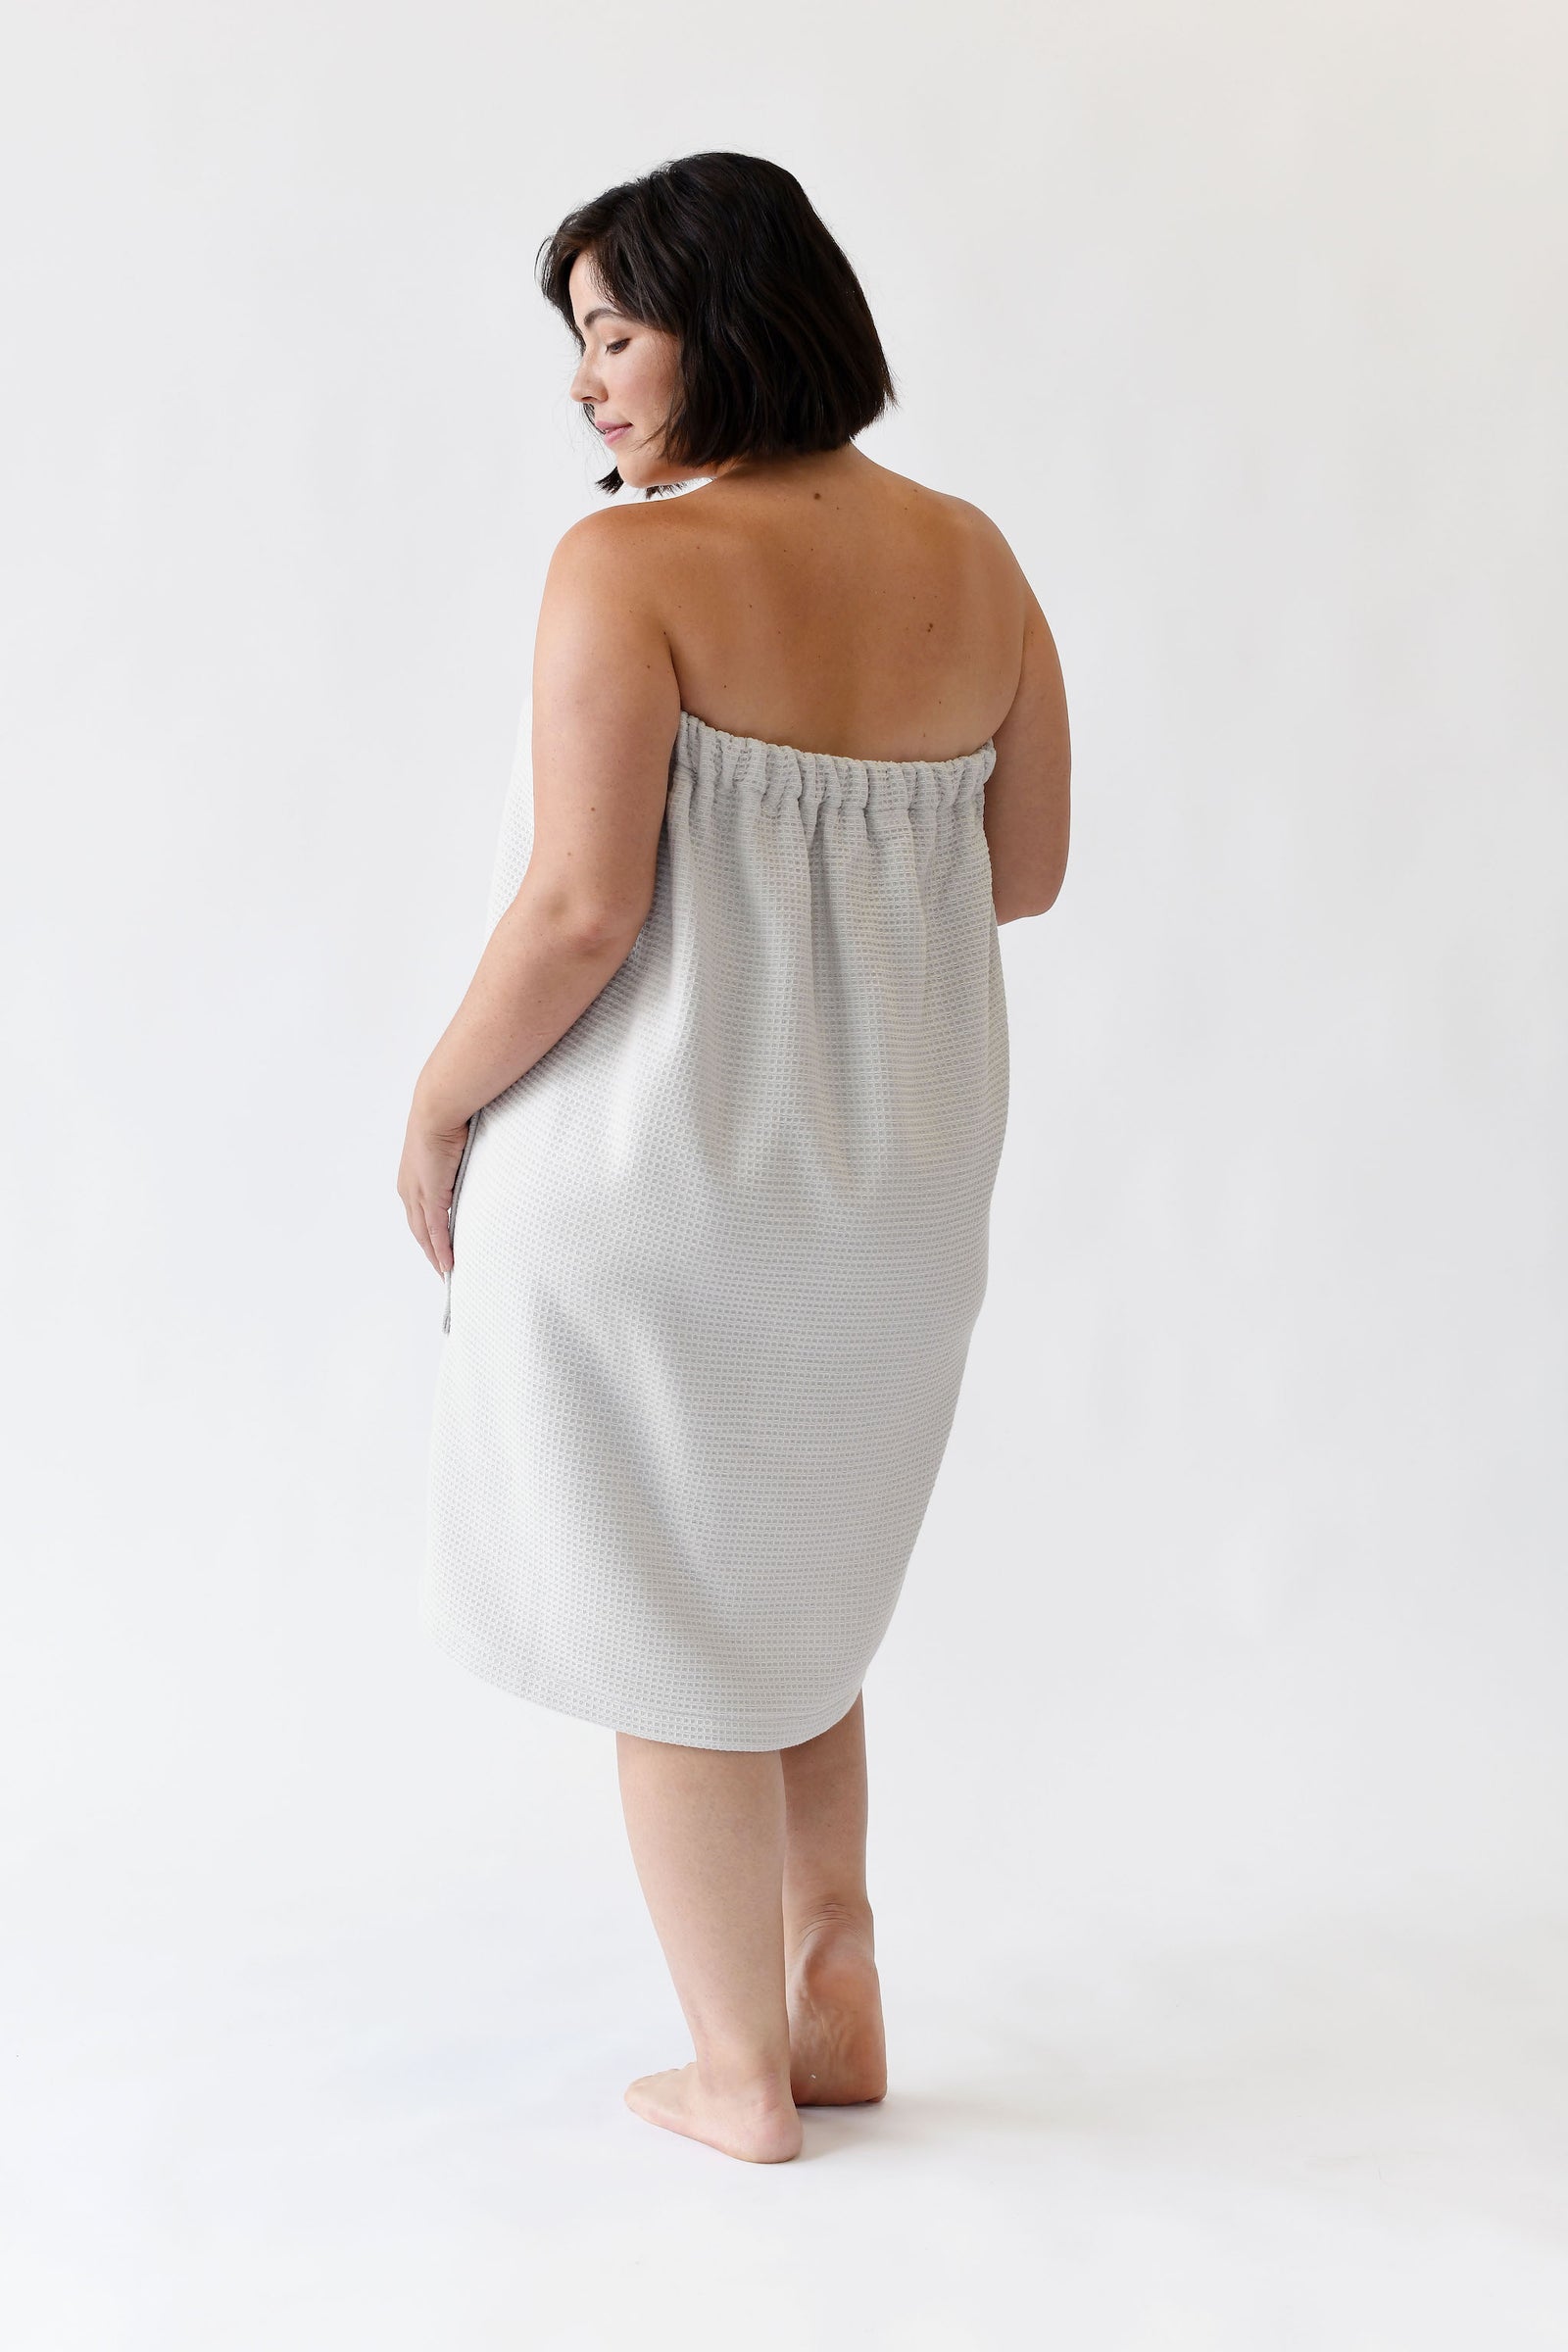 Light Grey Waffle Bath Wrap. The bath wrap is shown being worn by a woman. Photo was taken with a white background.